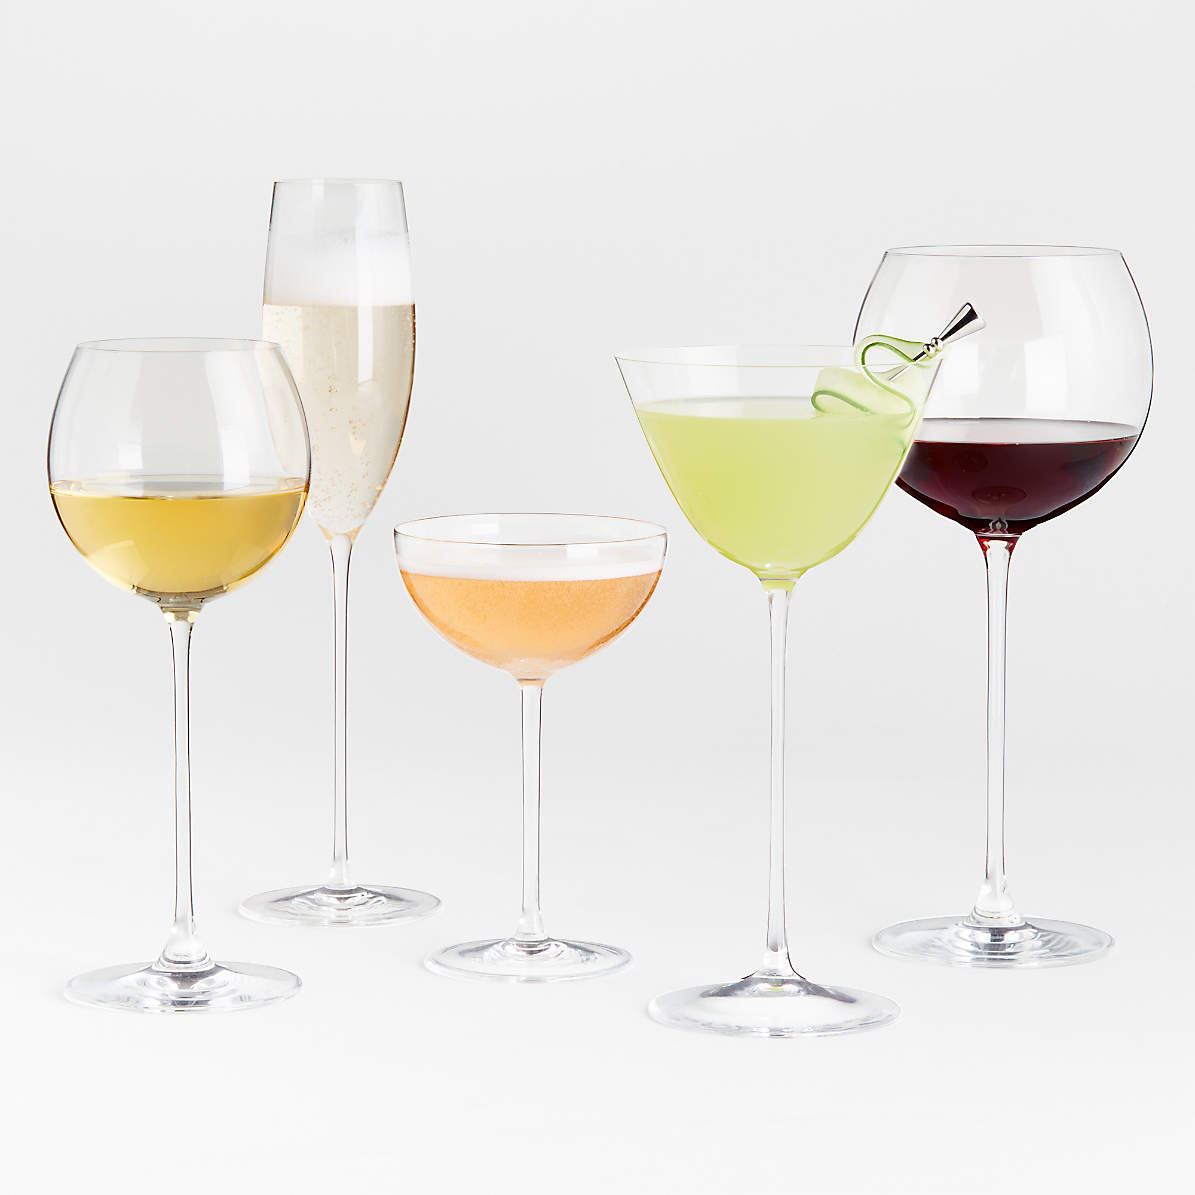 Camille 13-Oz. Long Stem Wine Glass - White + Reviews, Crate & Barrel